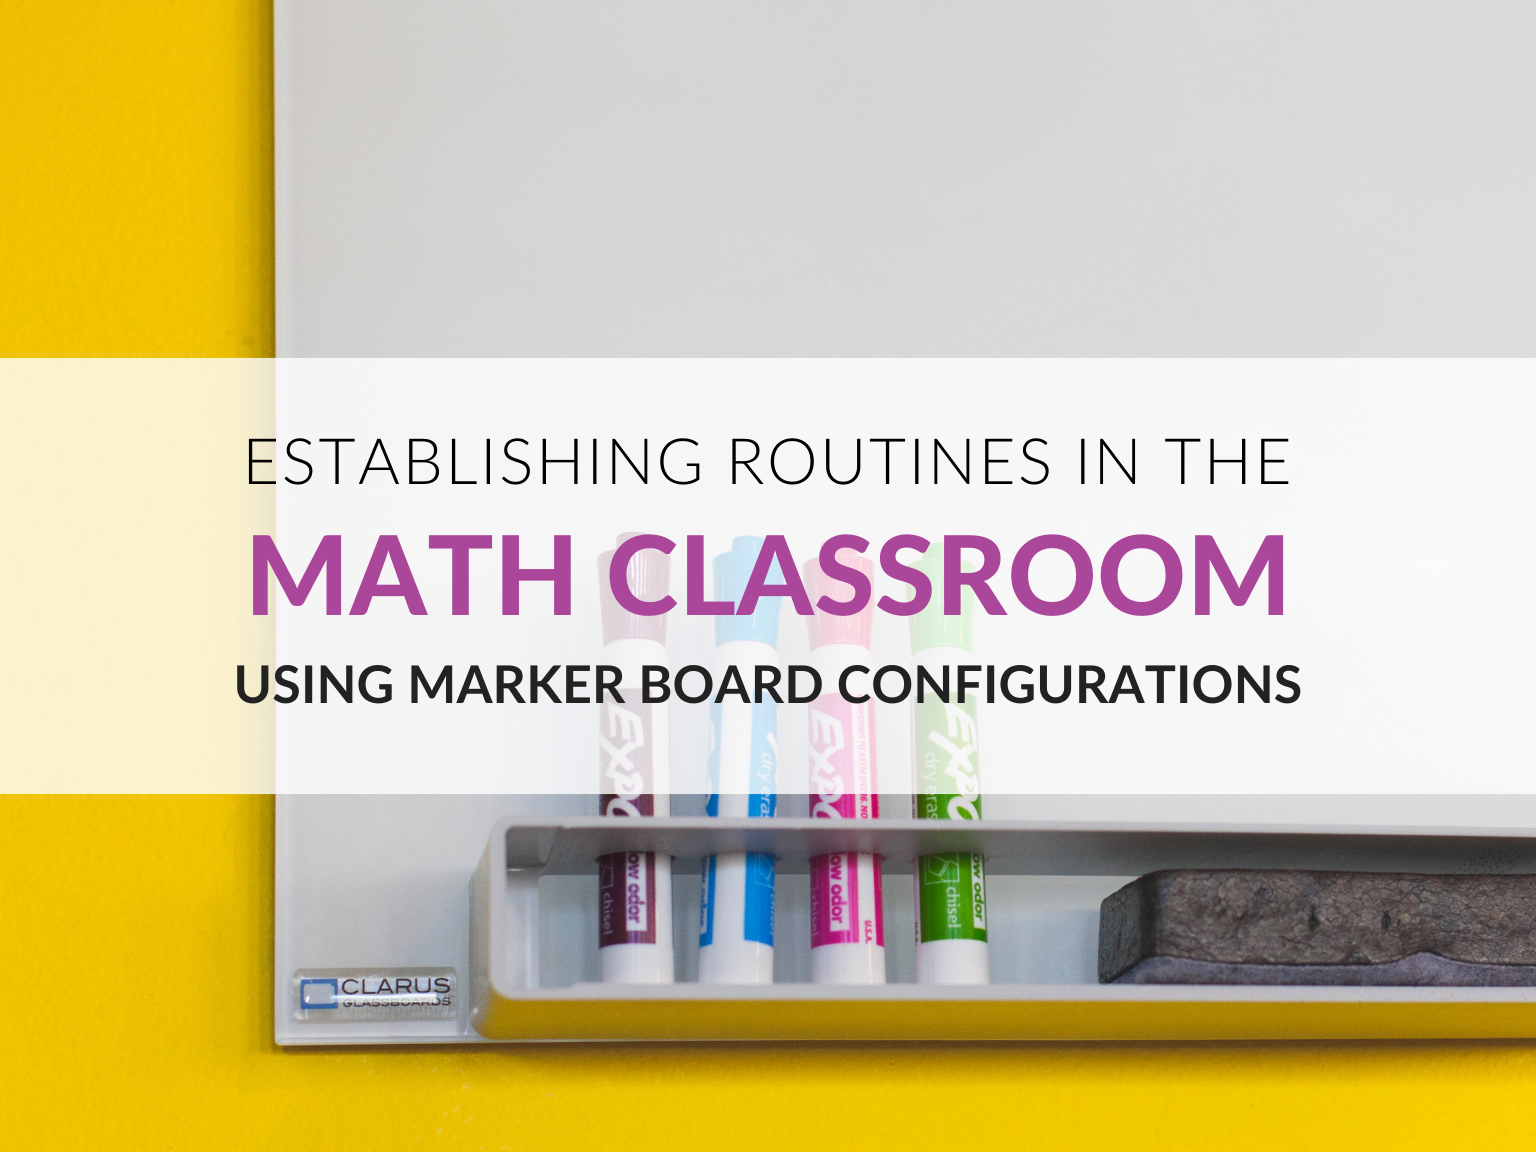 math-classroom-routines-marker-board-configurations-white-board-layout